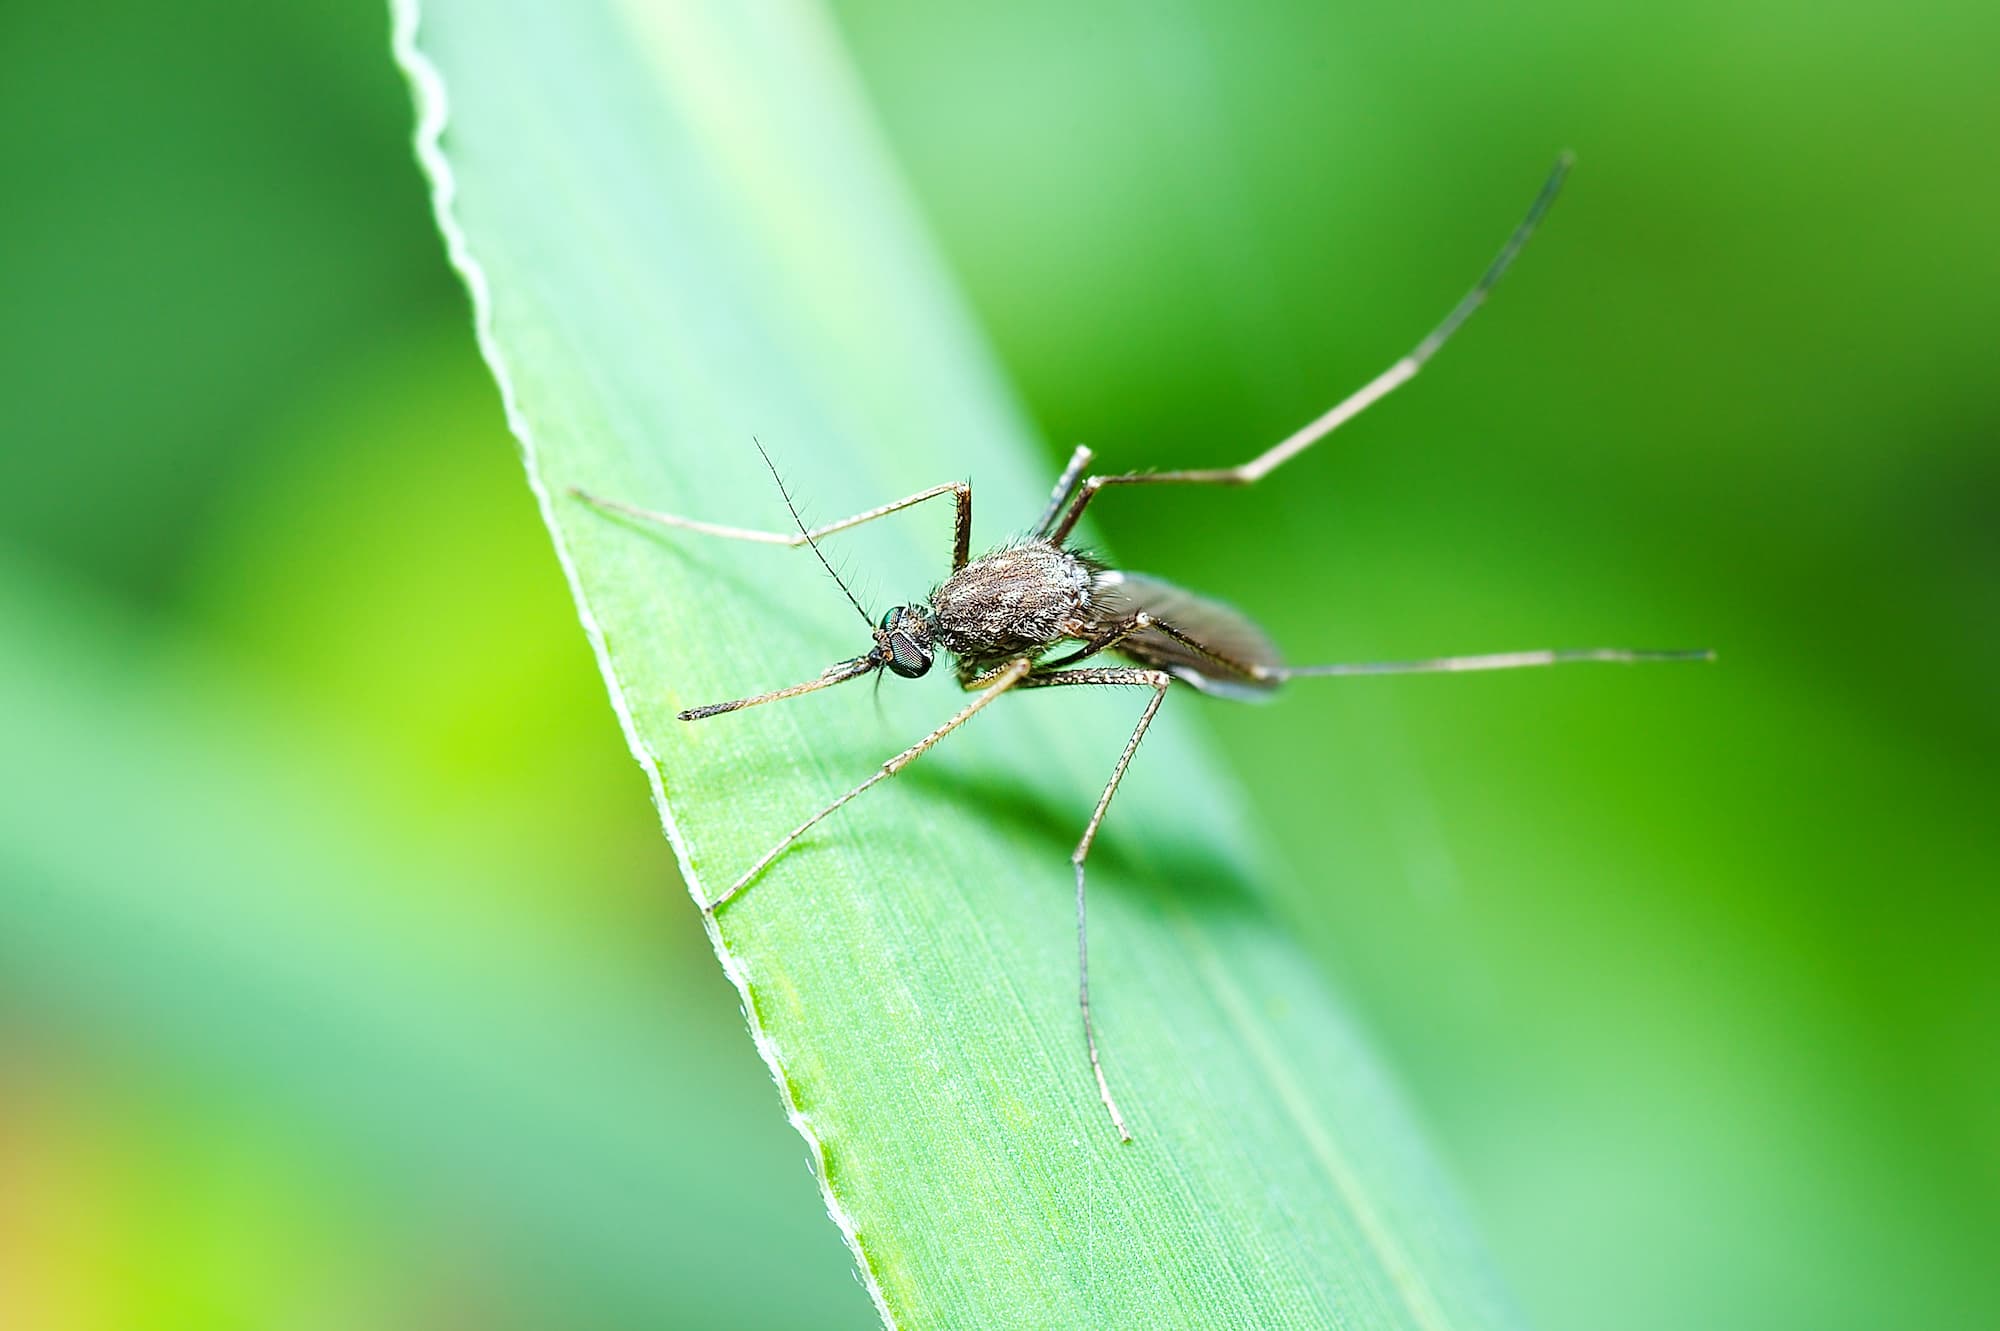 a close up image of a mosquito on a leaf